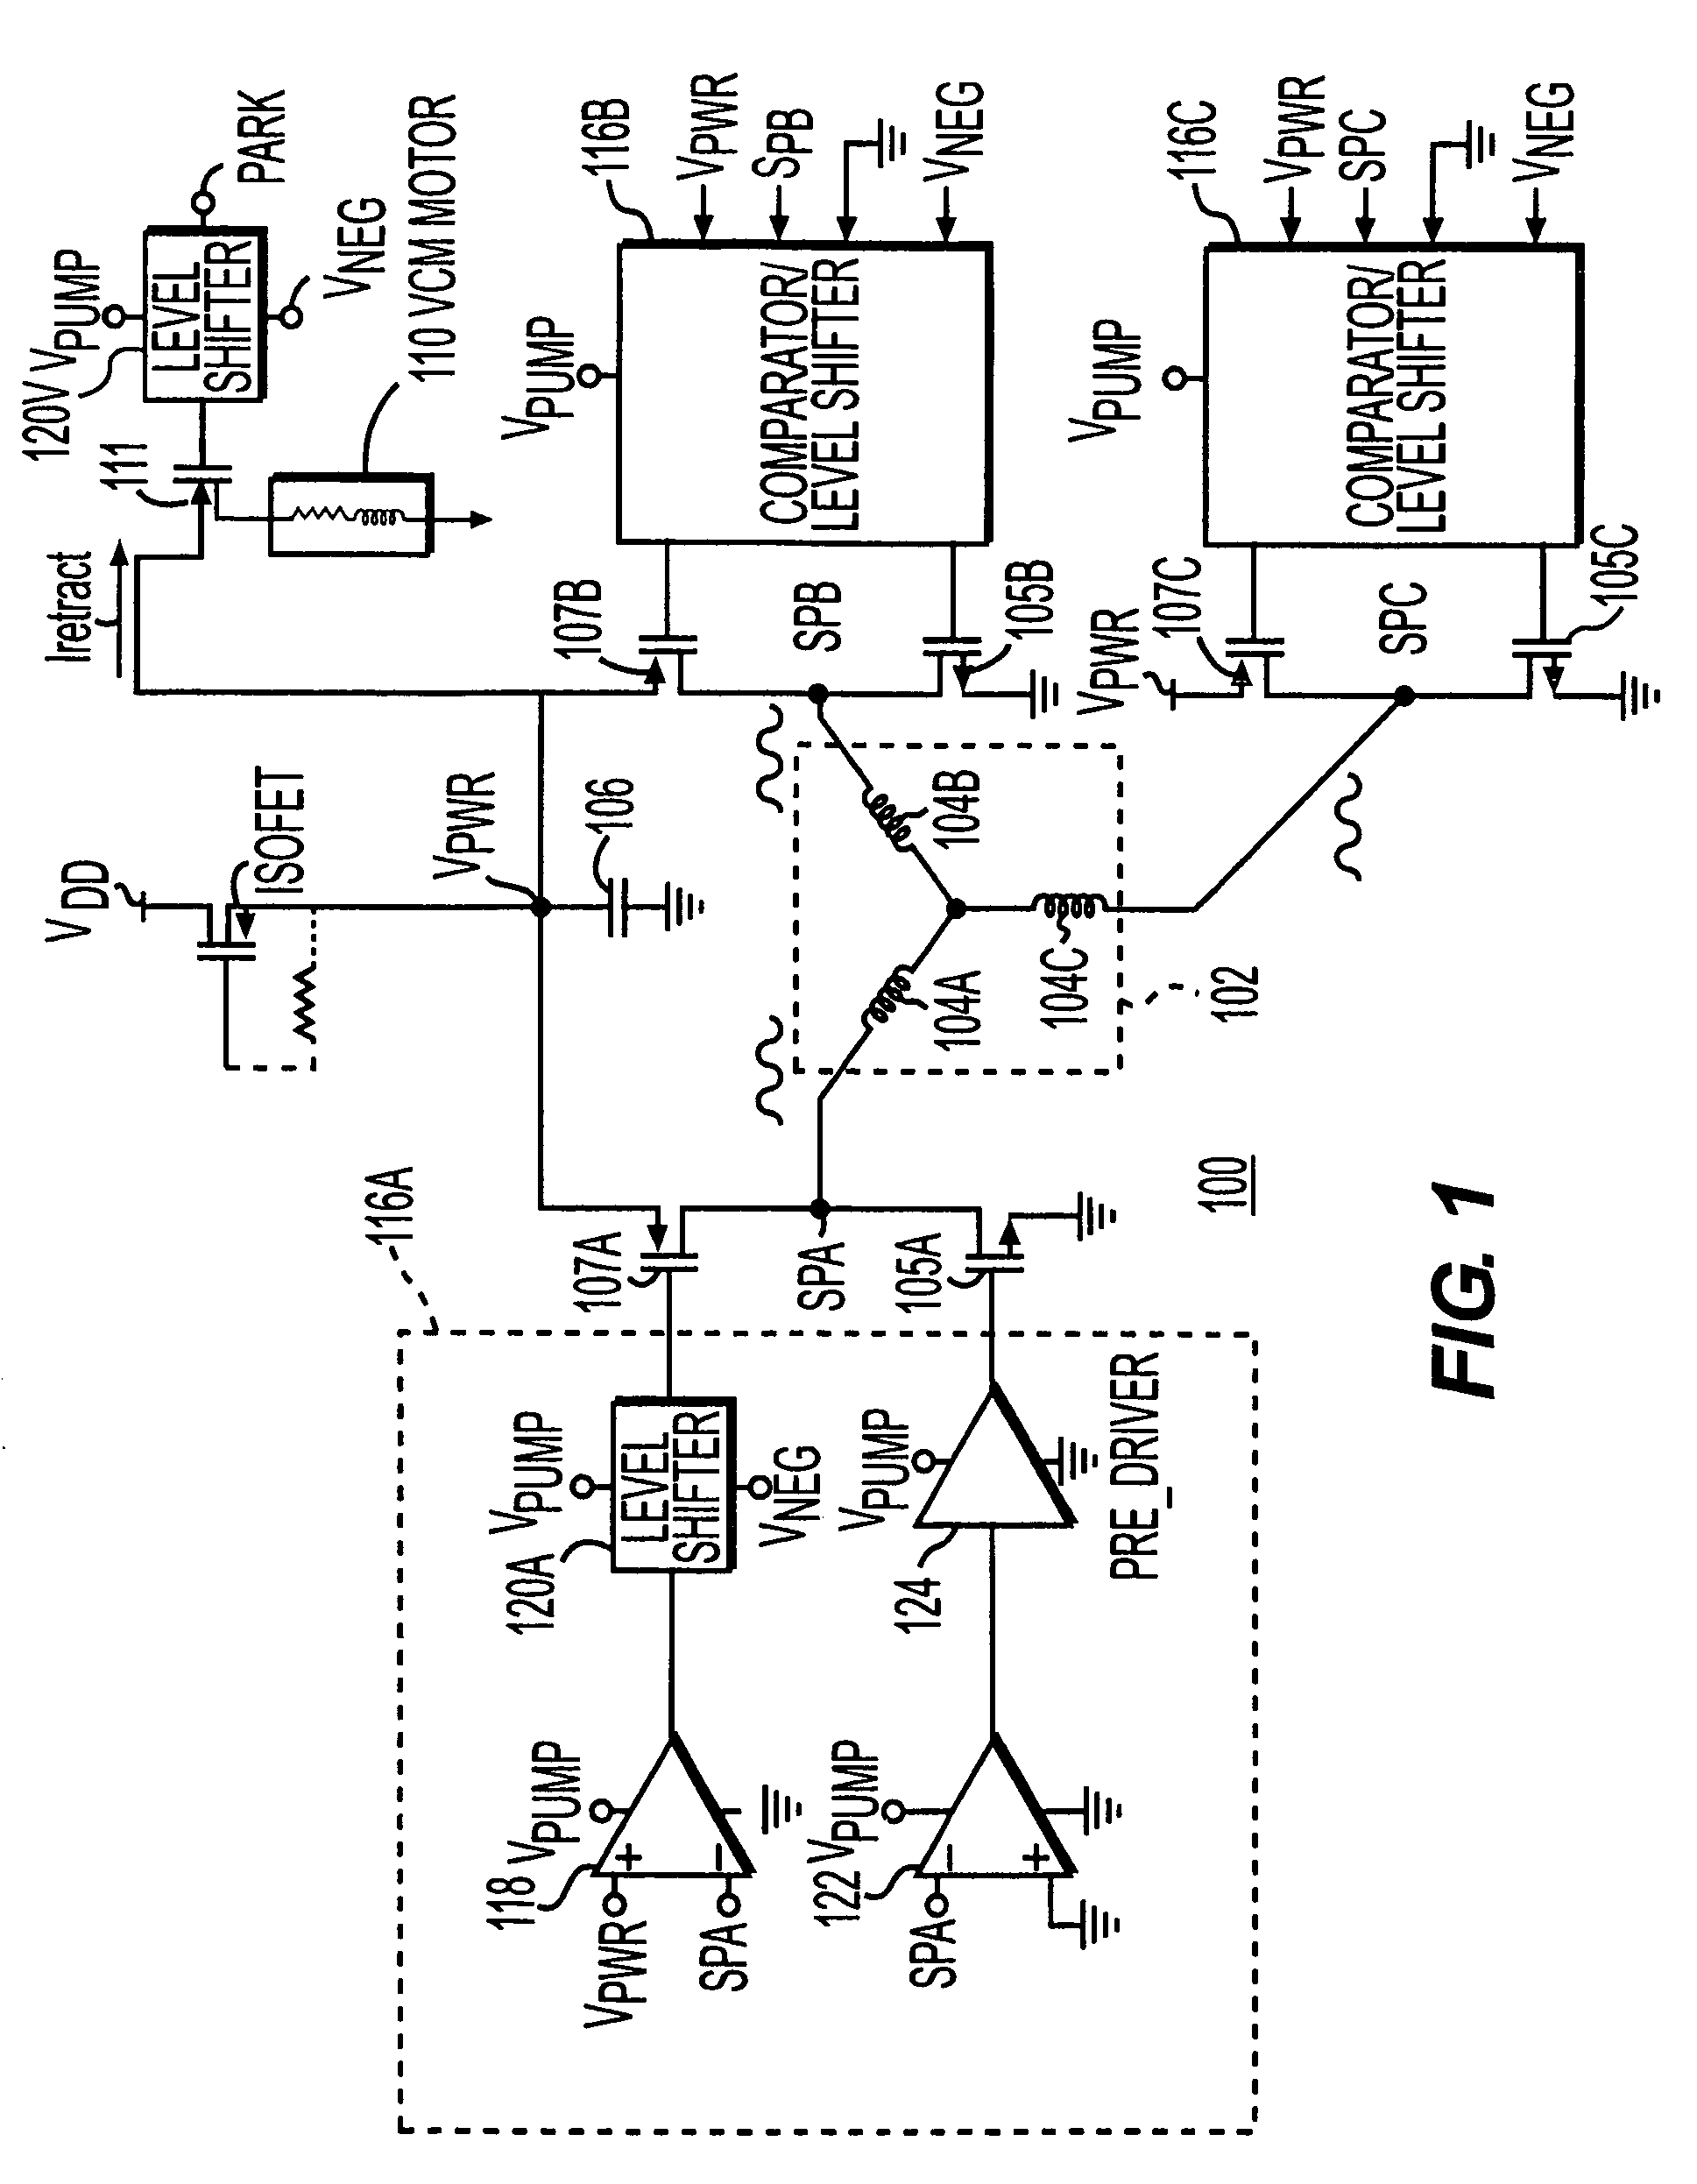 System and process for utilizing back electromotive force in disk drives